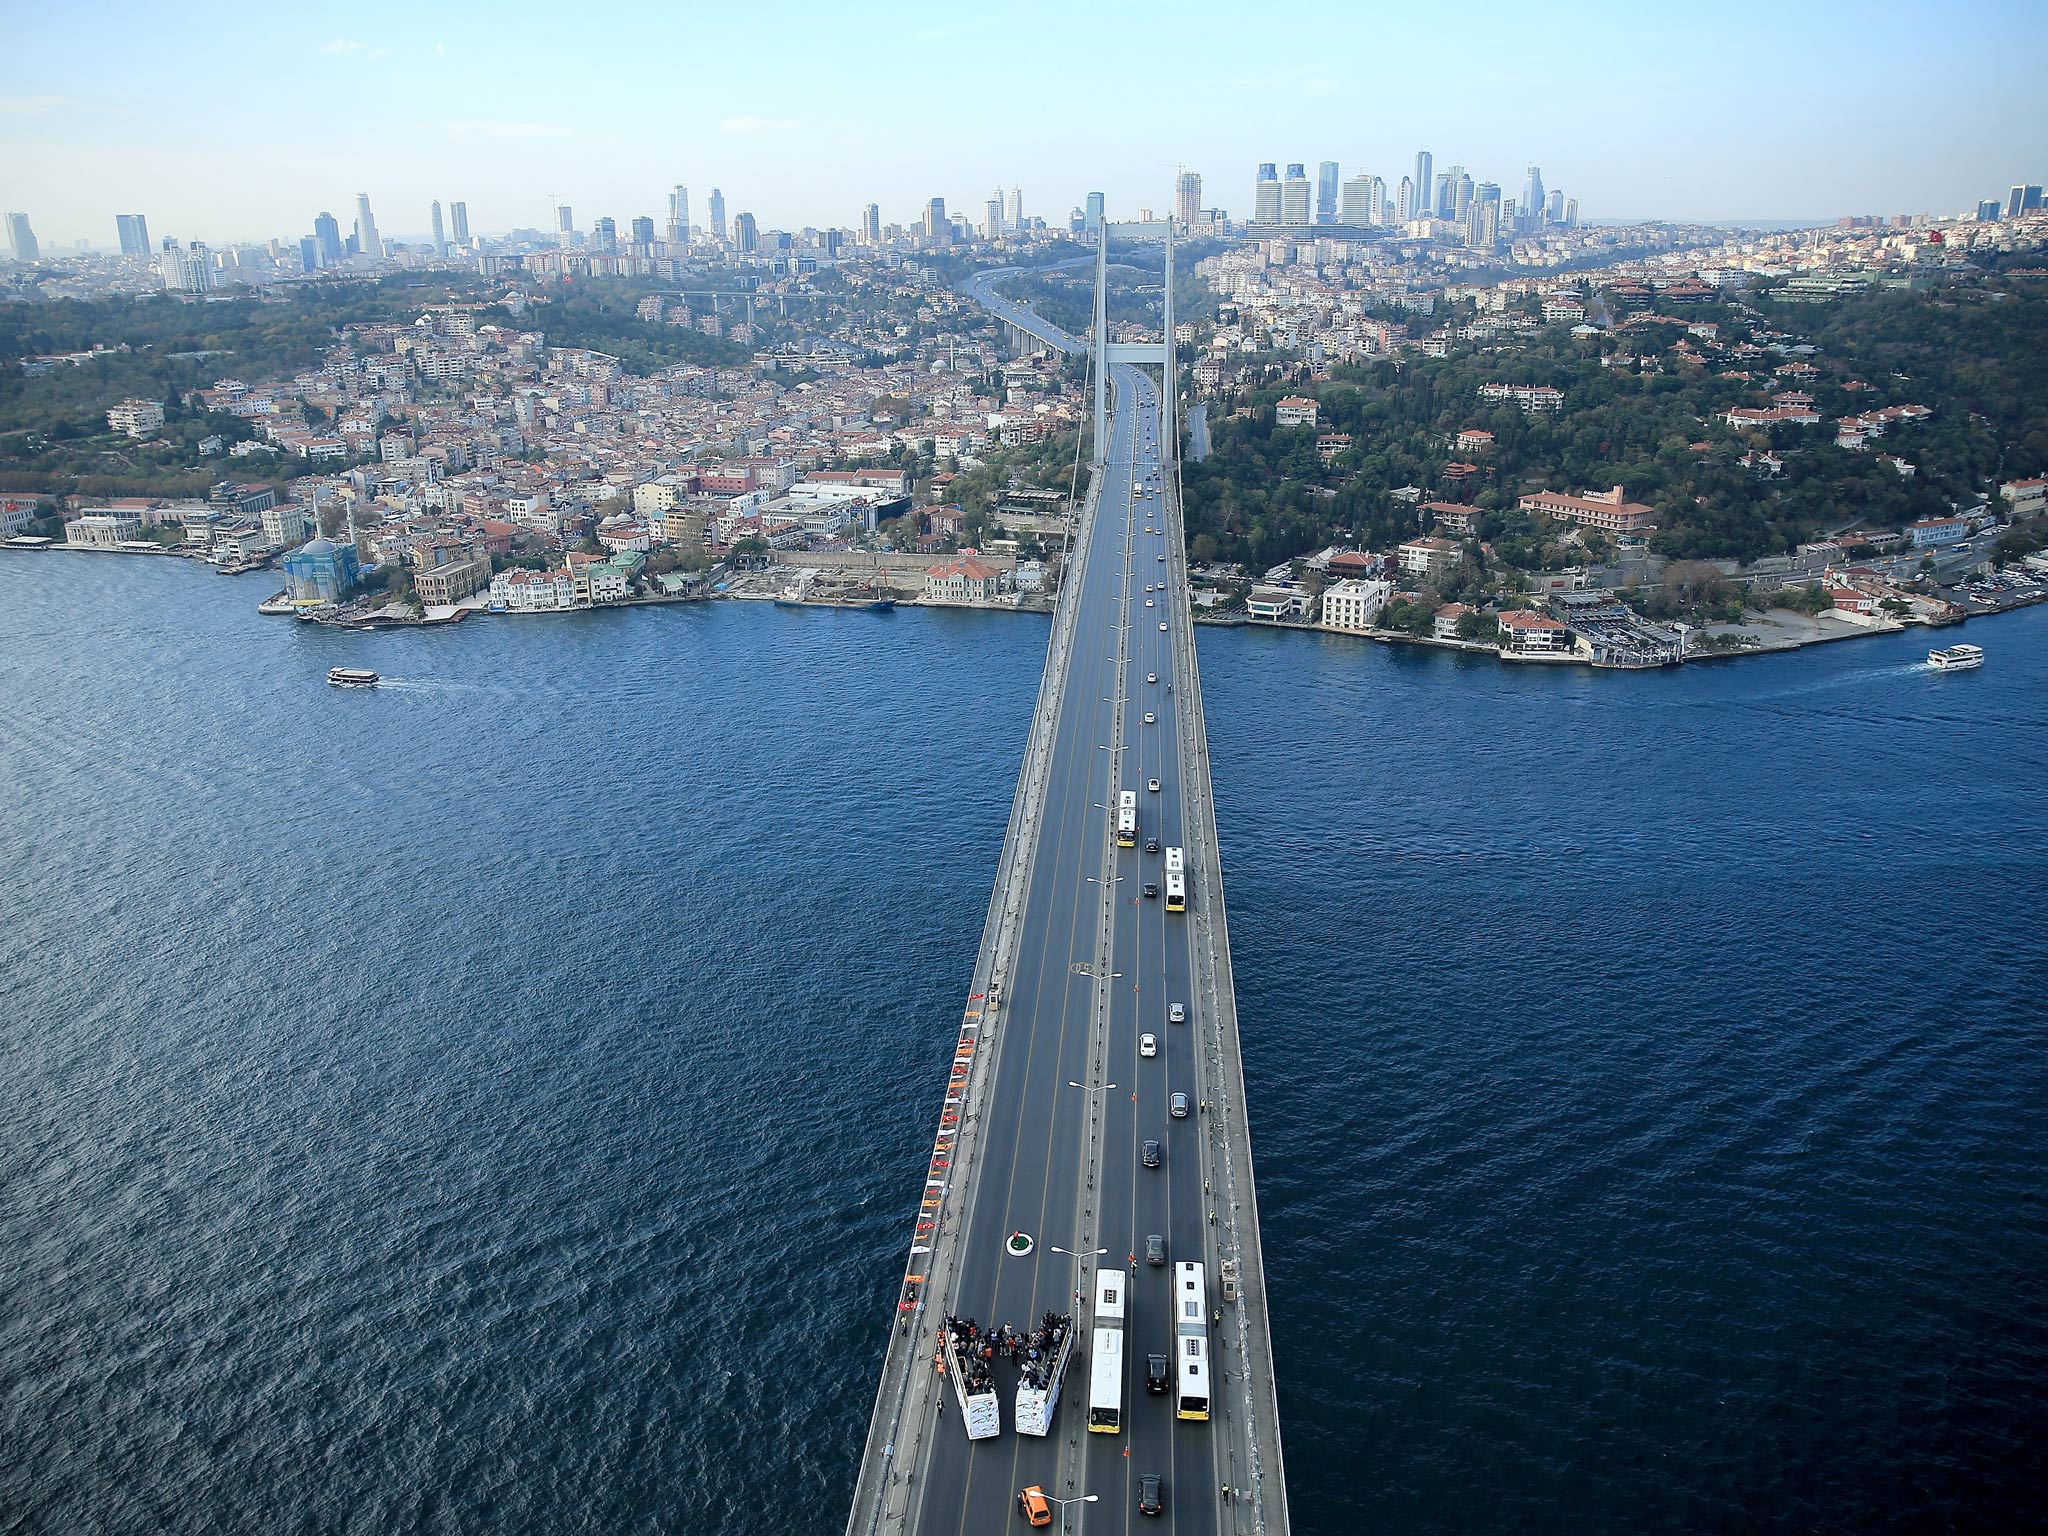 Tiger Woods makes history as he hits the first golf shots from East to West on Istanbul's iconic Bosphorus Bridge